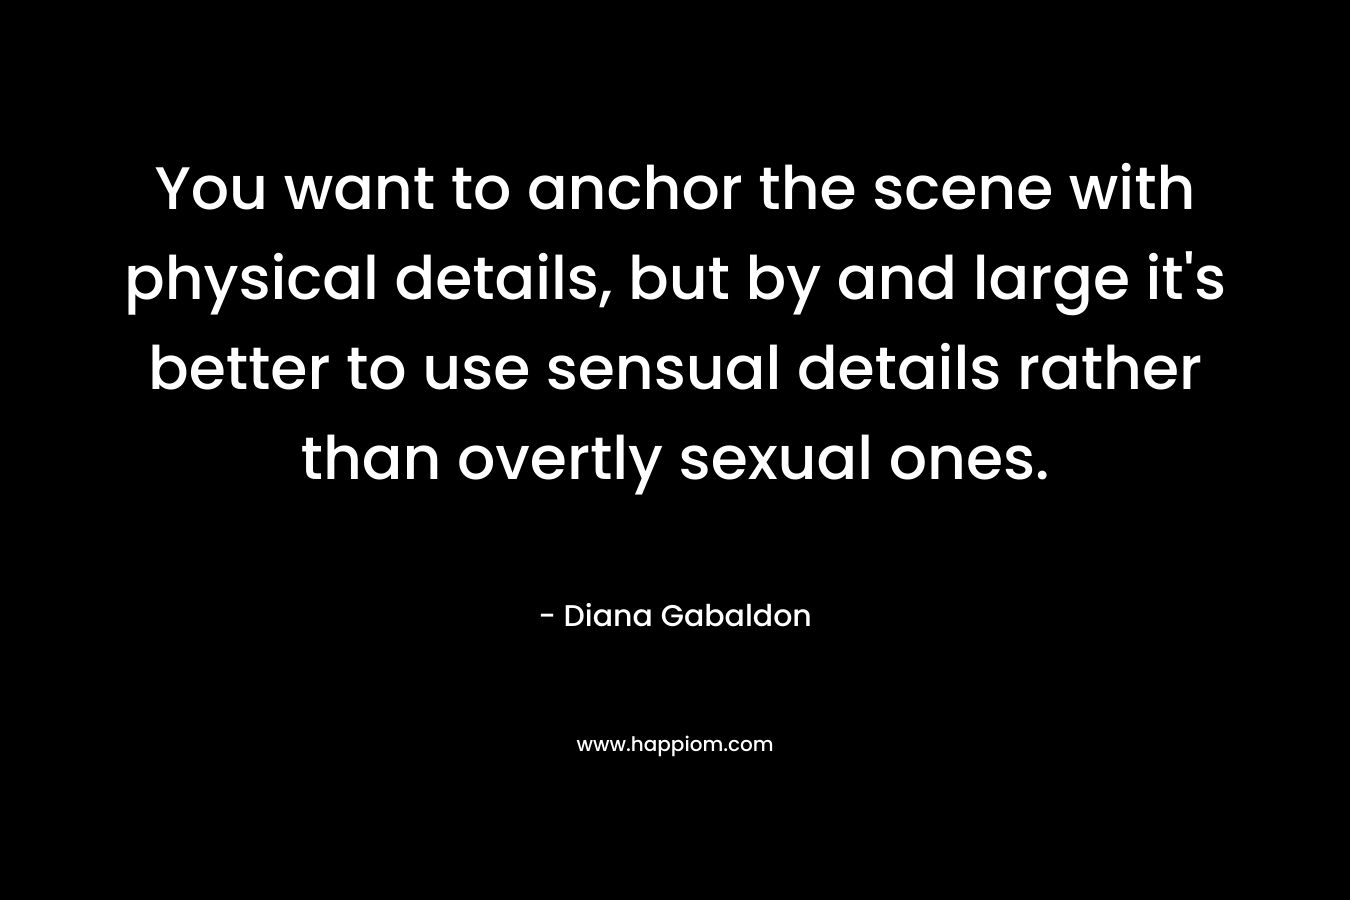 You want to anchor the scene with physical details, but by and large it’s better to use sensual details rather than overtly sexual ones. – Diana Gabaldon